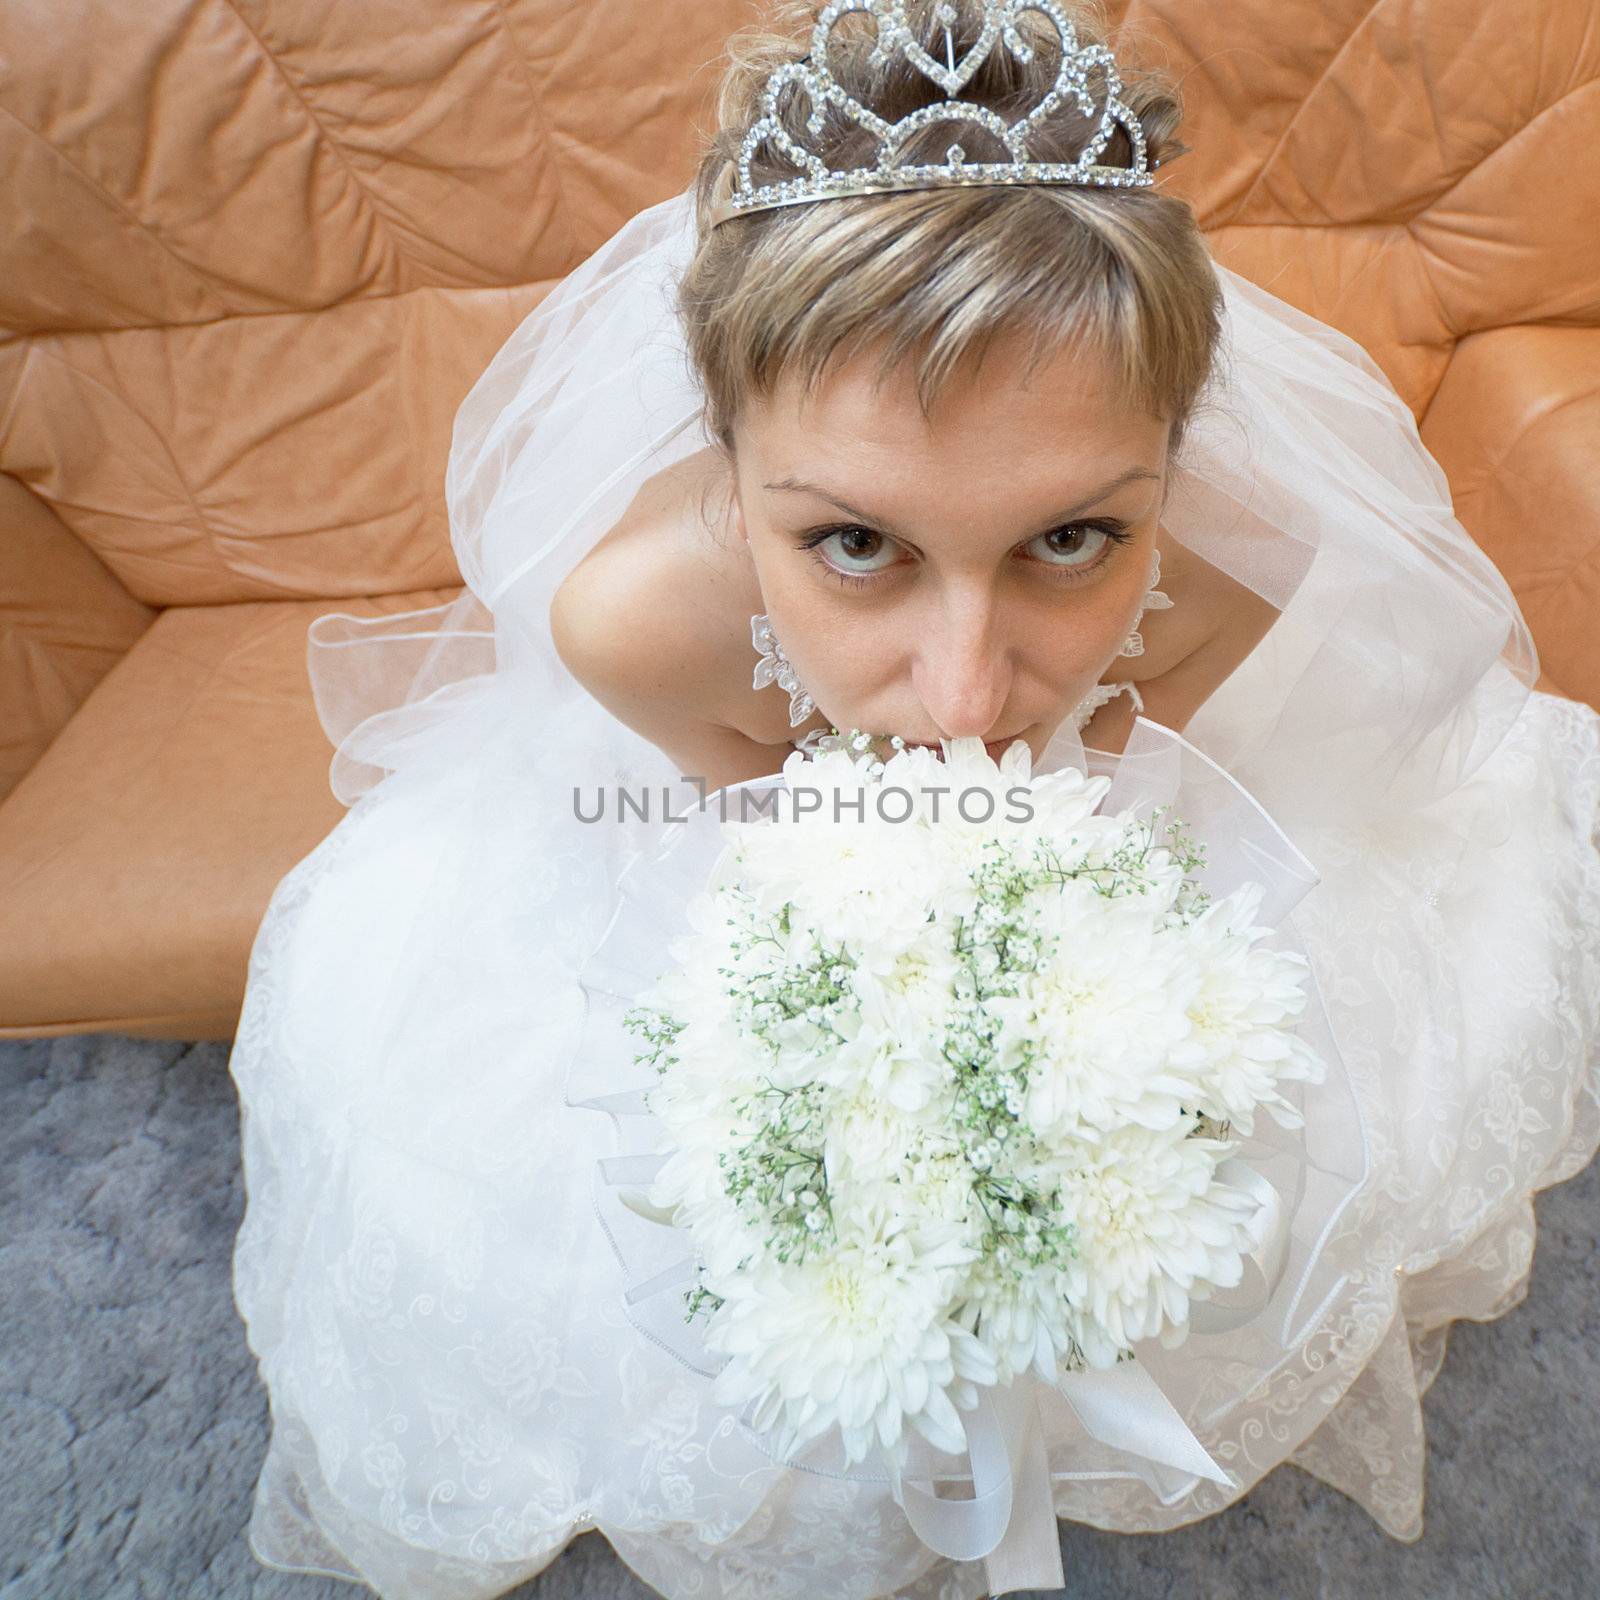 The amusing bride sits on a sofa with a bouquet - the top view